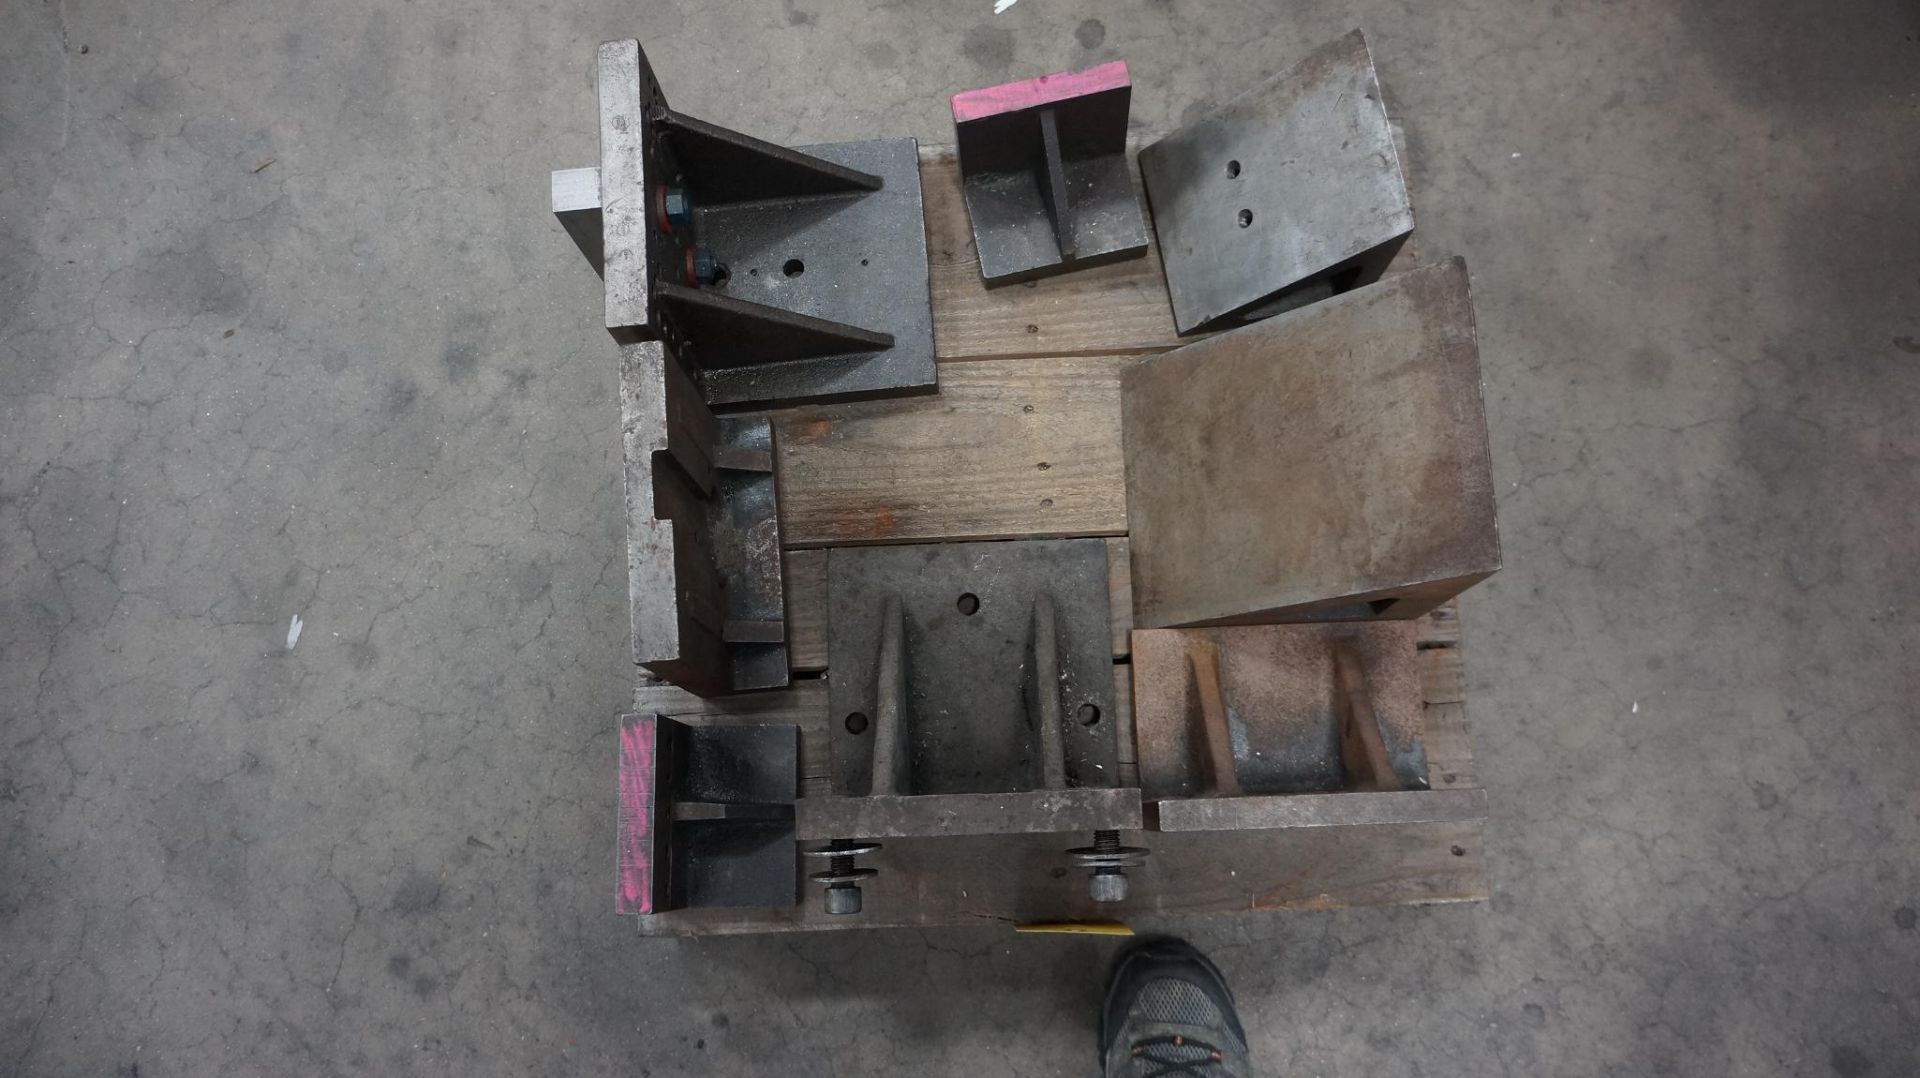 LOT OF ANGLE PLATES (THREE PALLETS) approx. (15) ranging in size from 12" x 24"W. x 17" tall to 5" x - Image 2 of 8